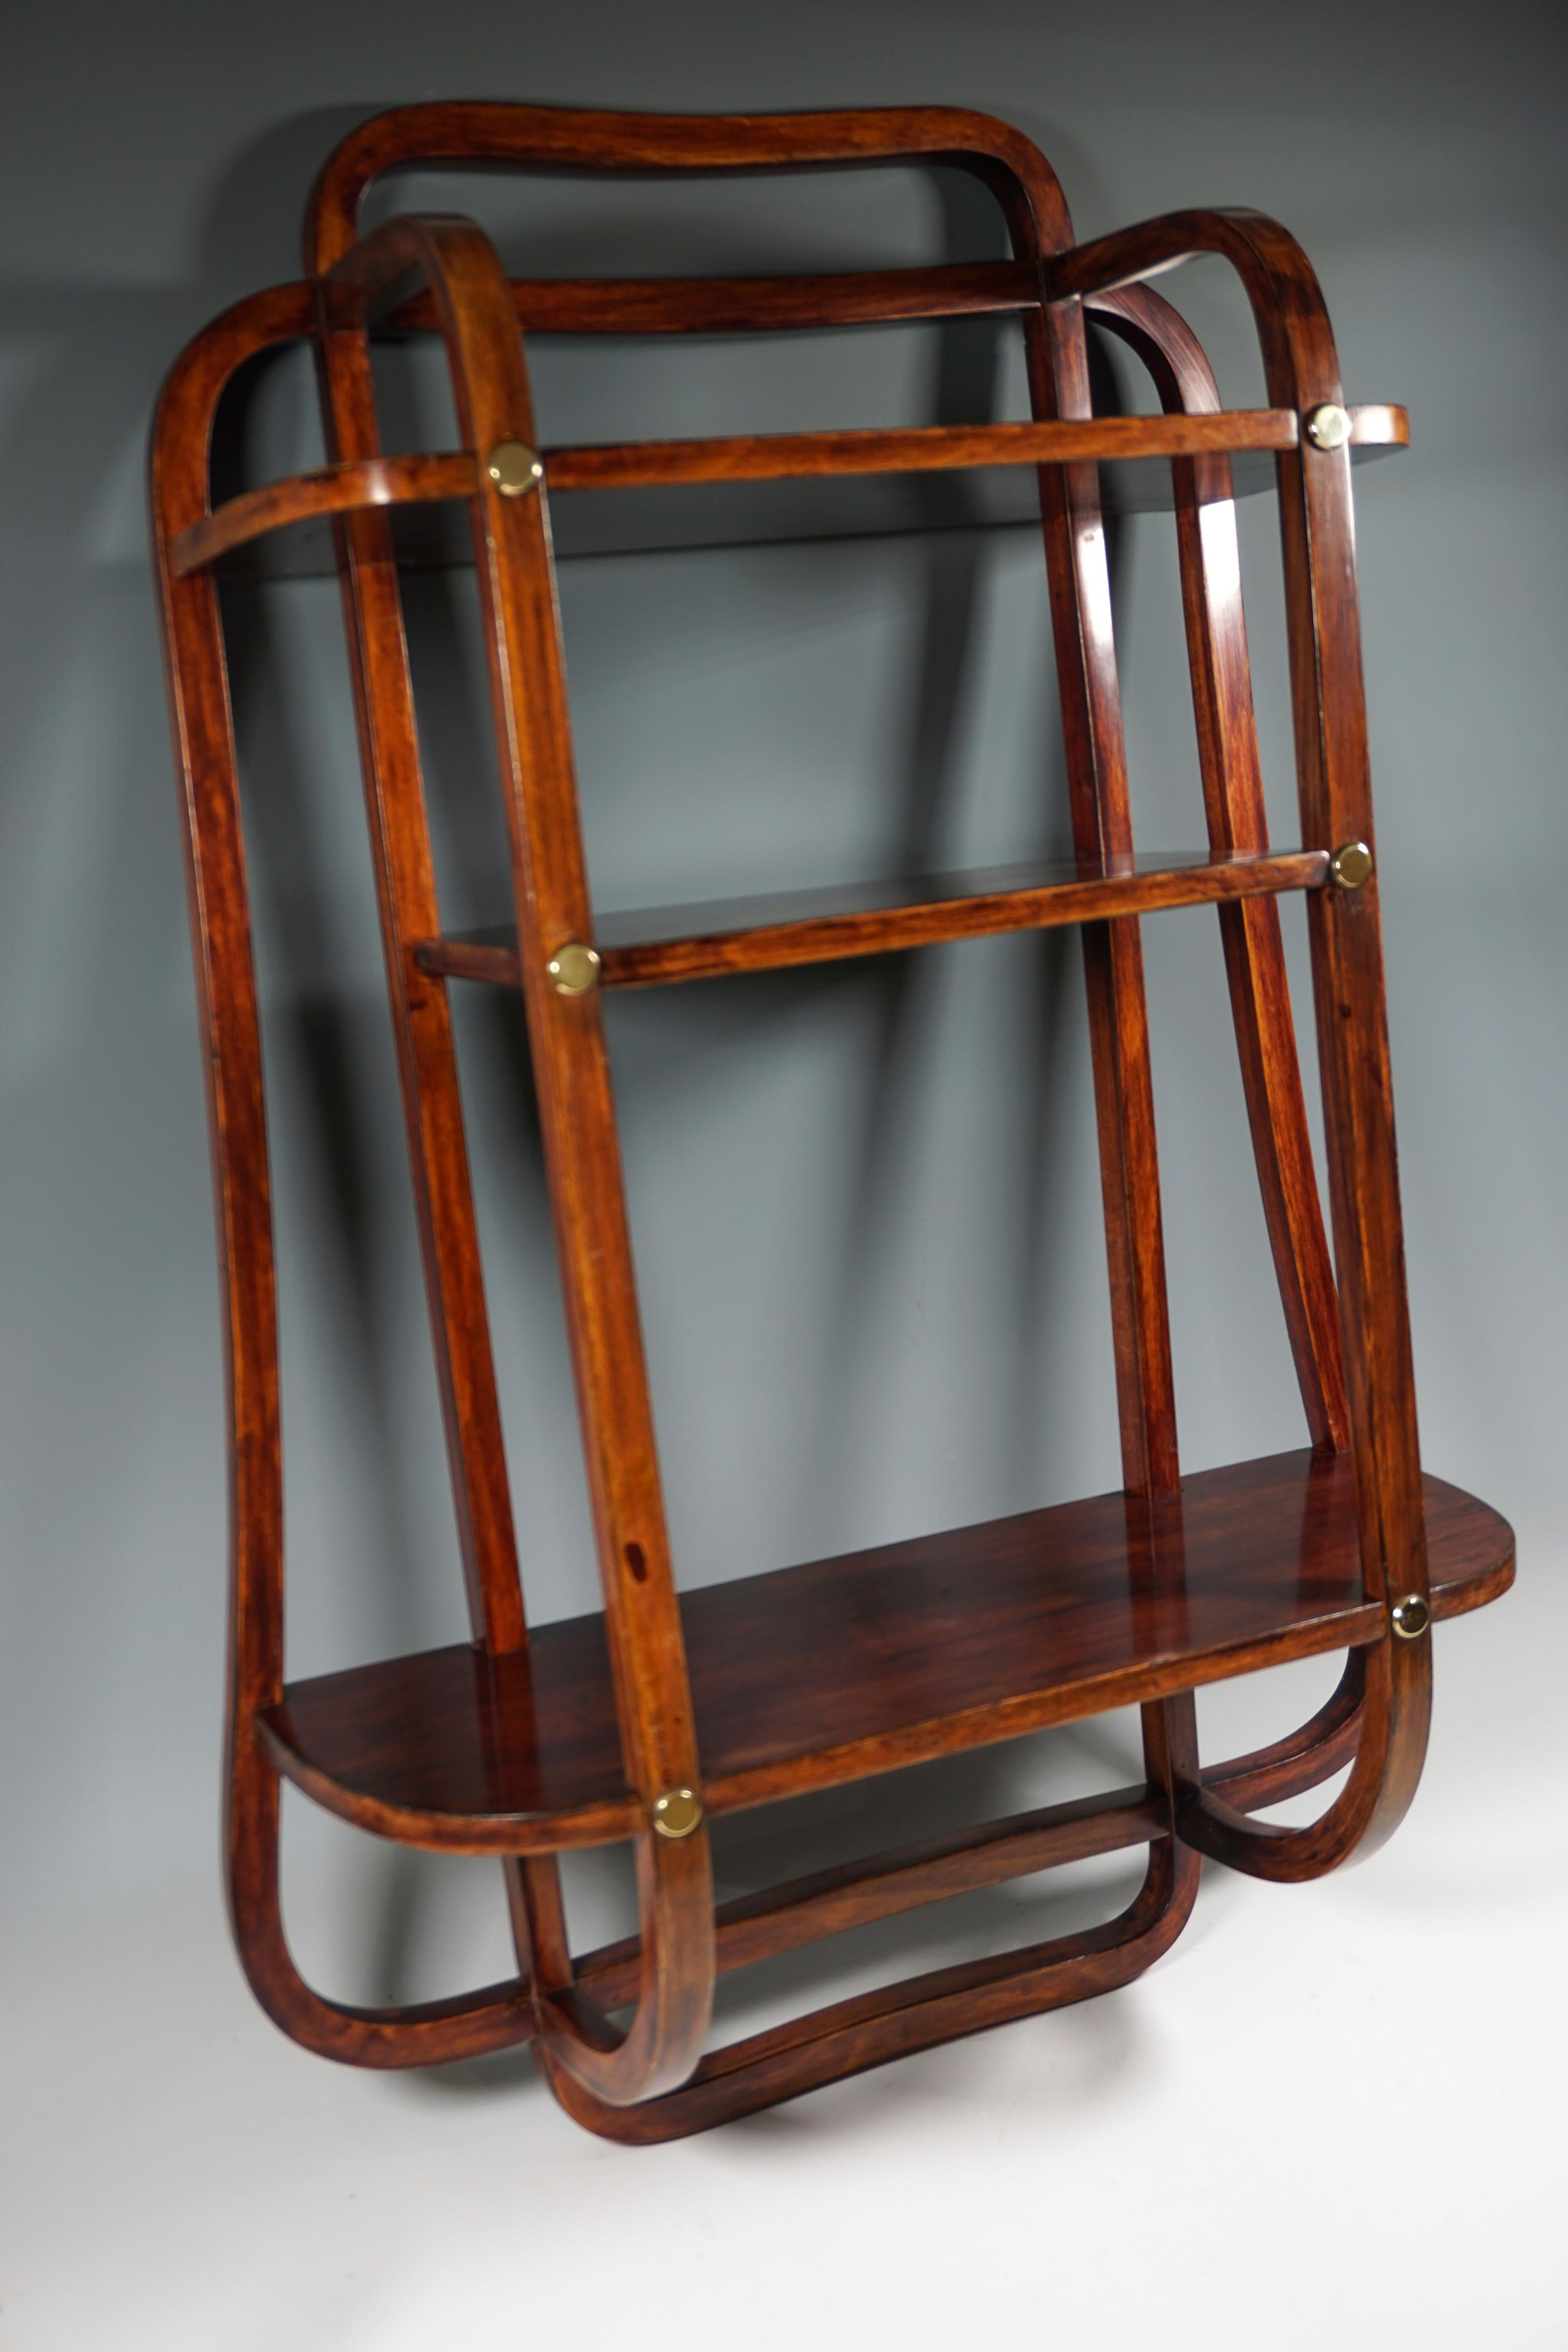 Stained Thonet Vienna Art Nouveau Wall Étagère No 51, Book Shelf, Mahogany stained, 1903